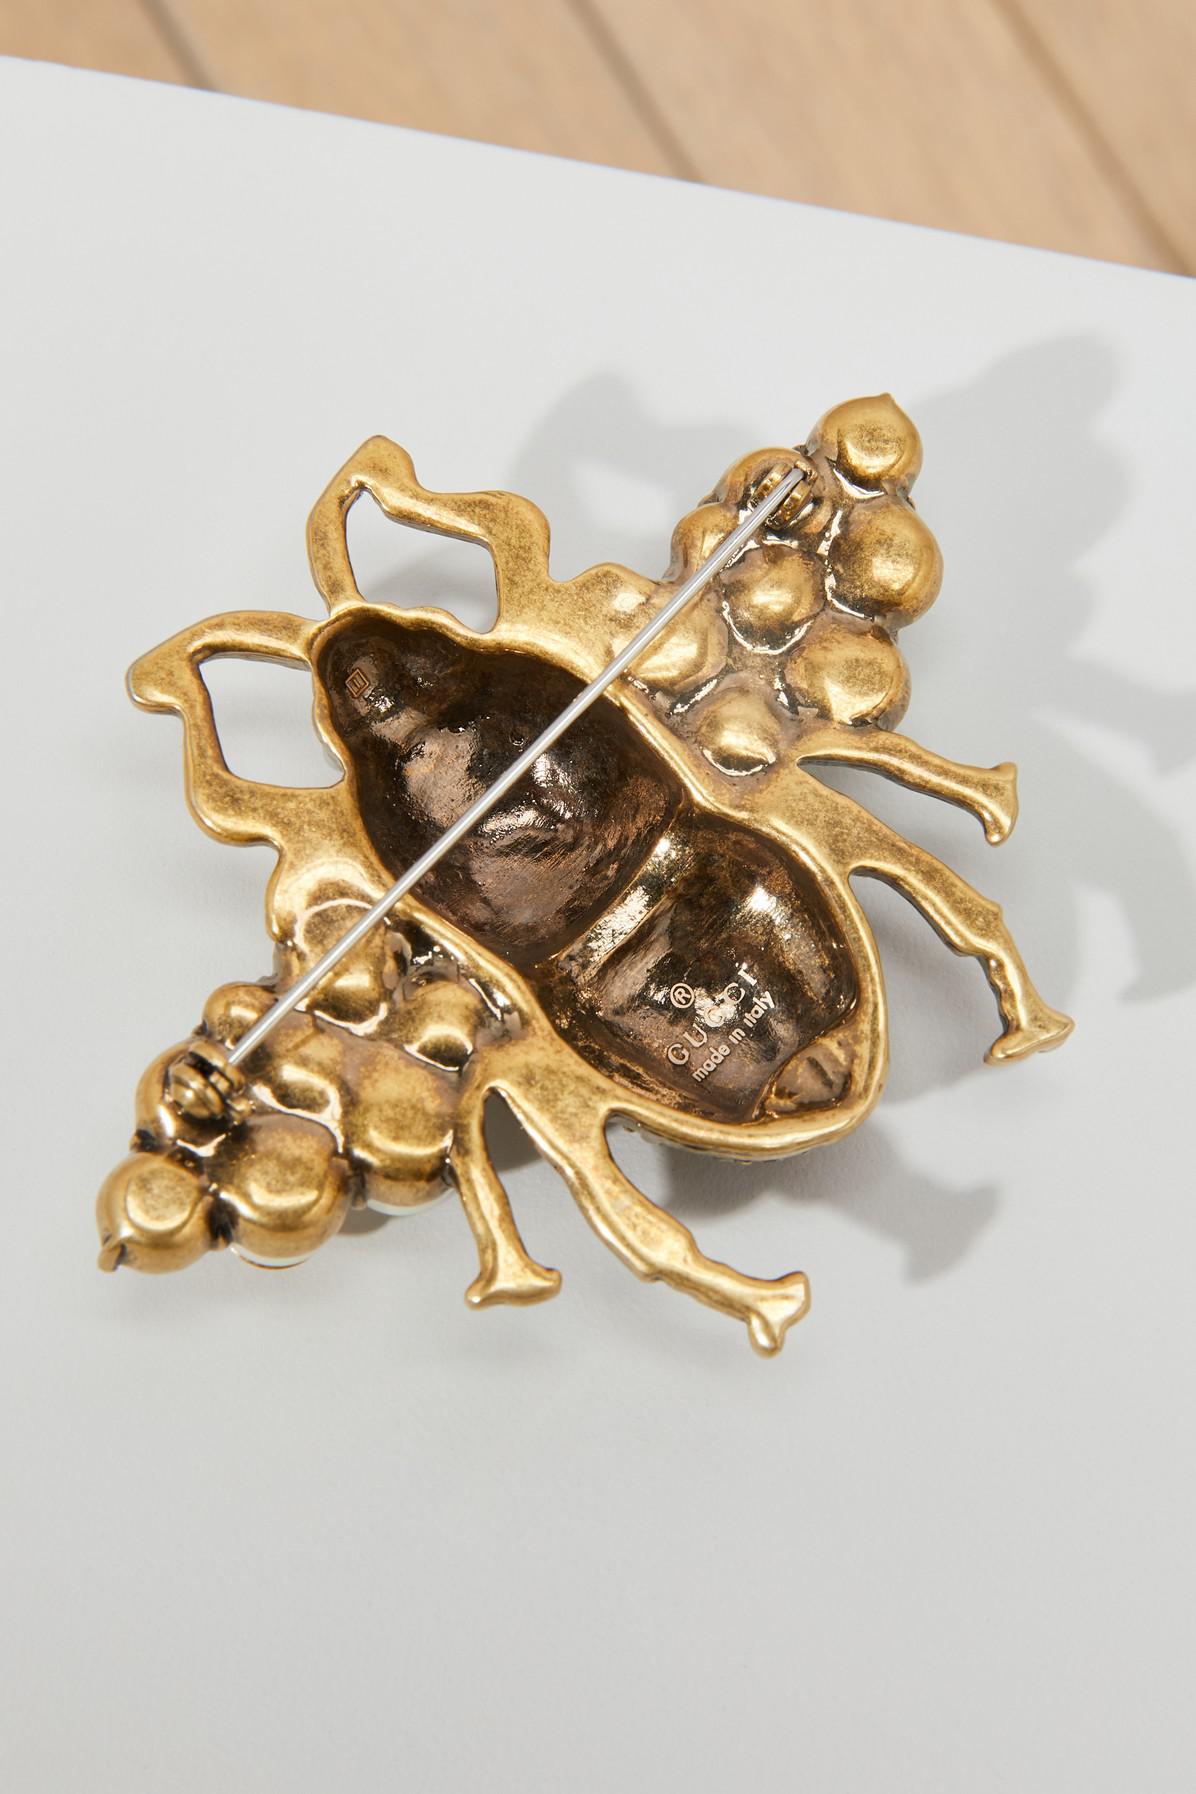 gucci bee brooch with crystals and pearls